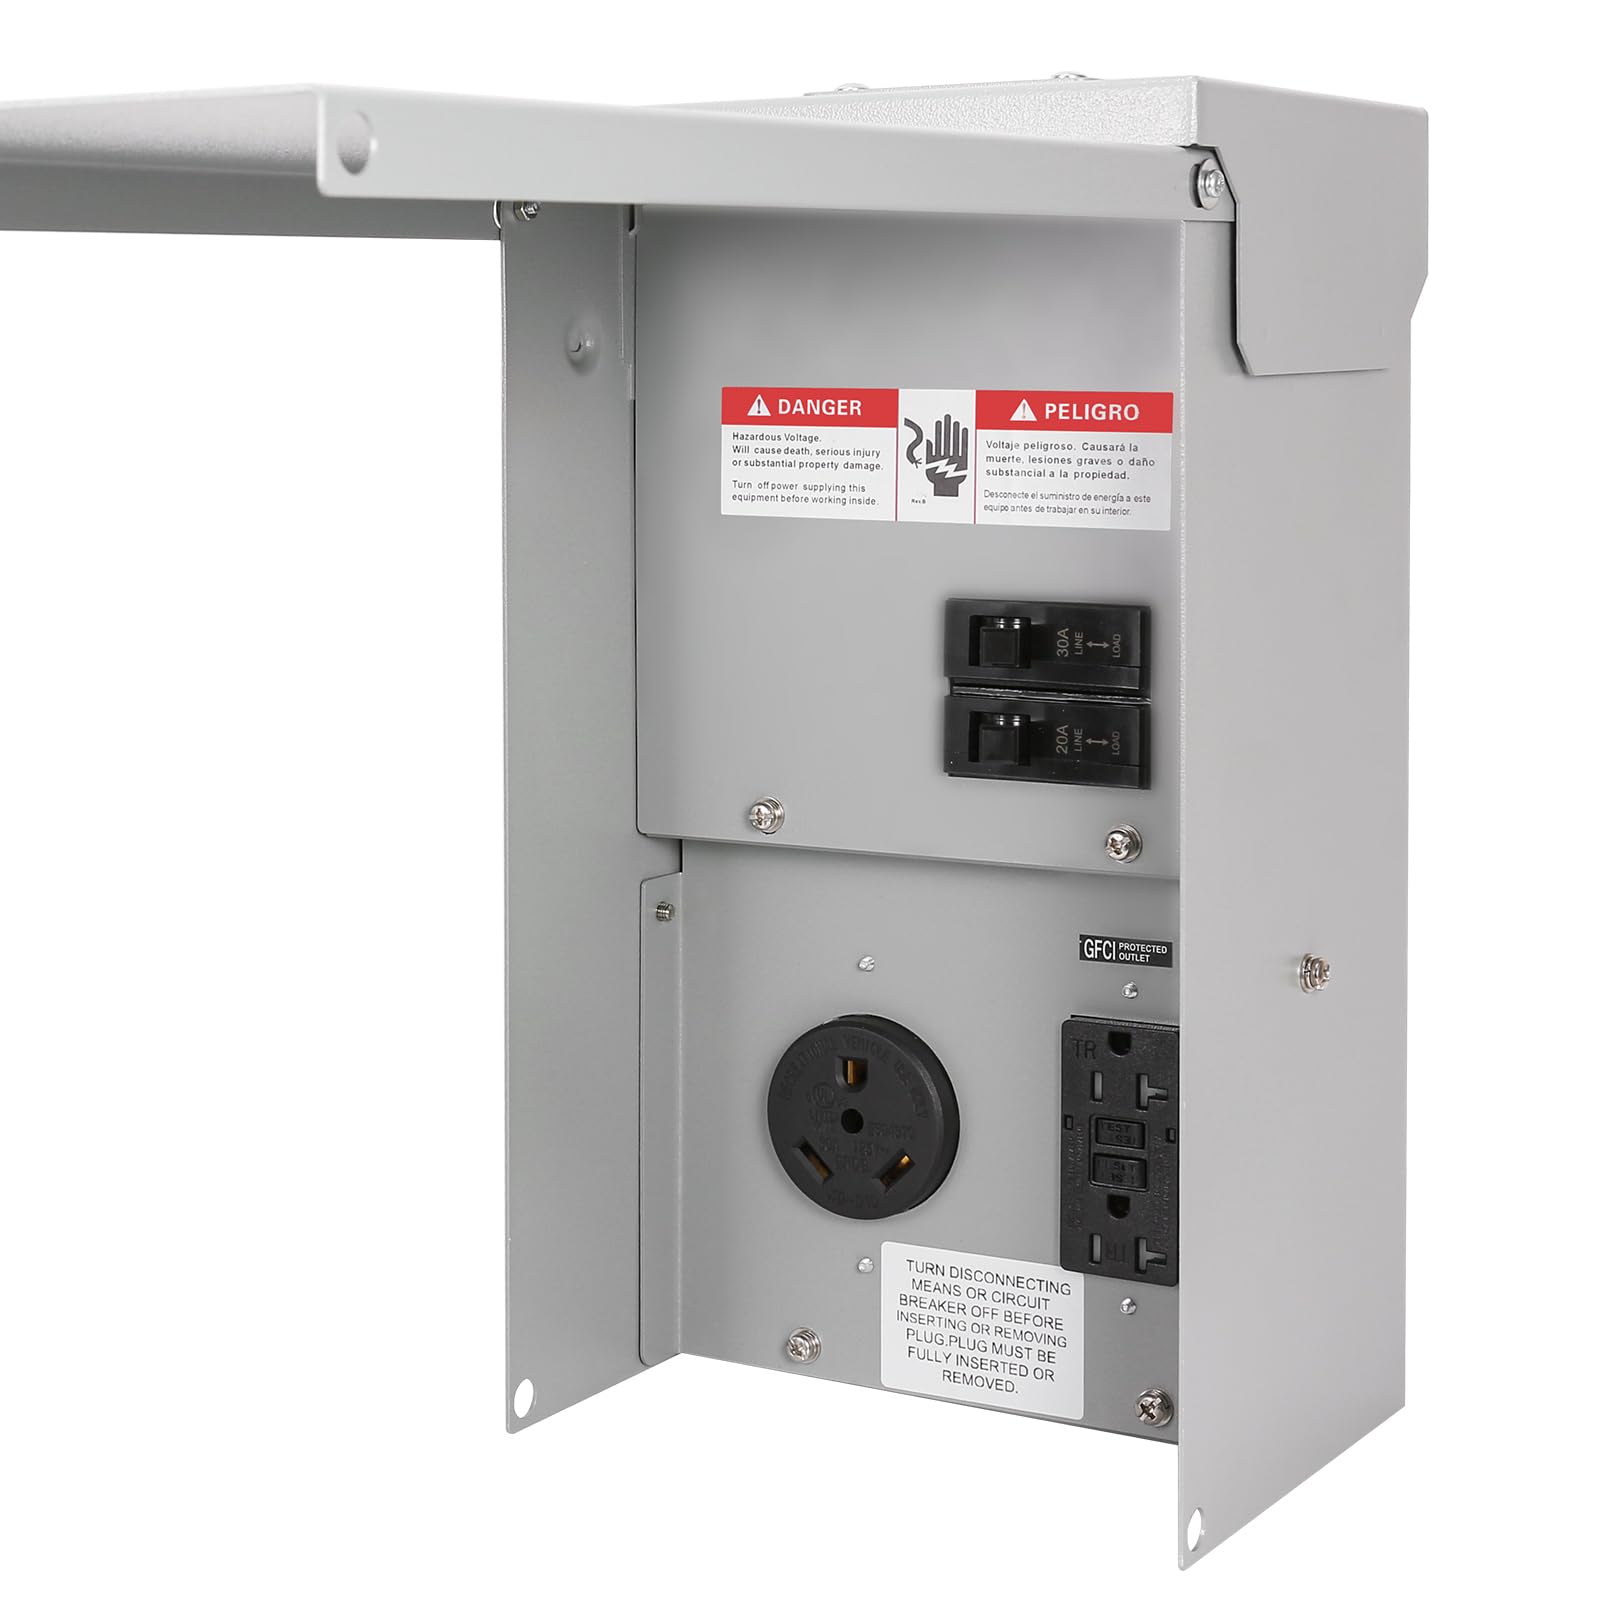 GFCI outlet and breaker box